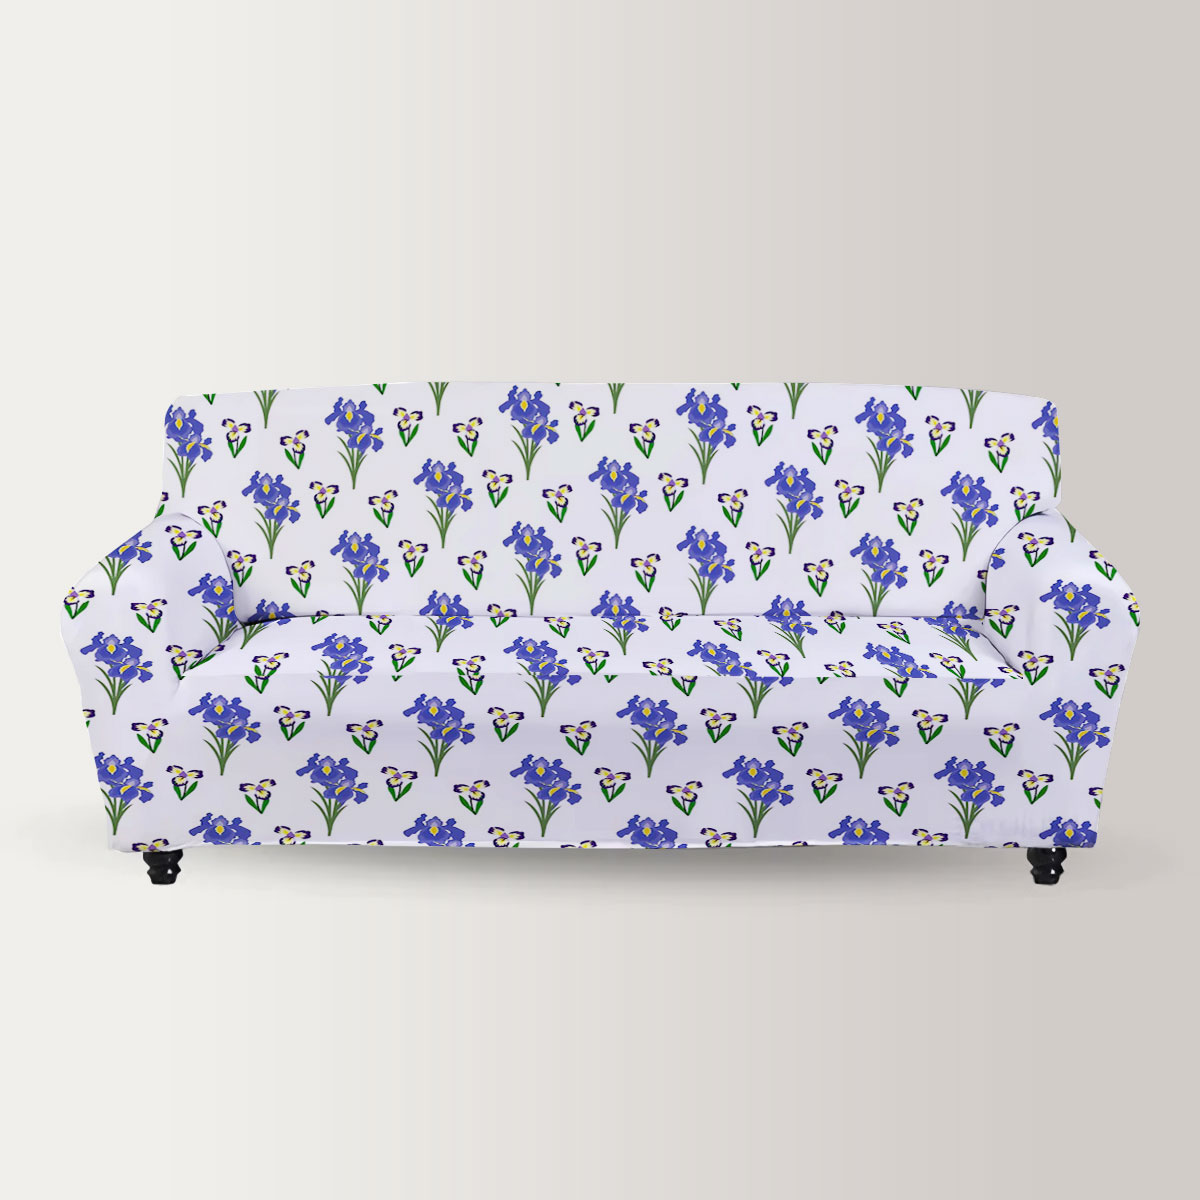 Iris Flower And Leaf Seamless Pattern Sofa Cover